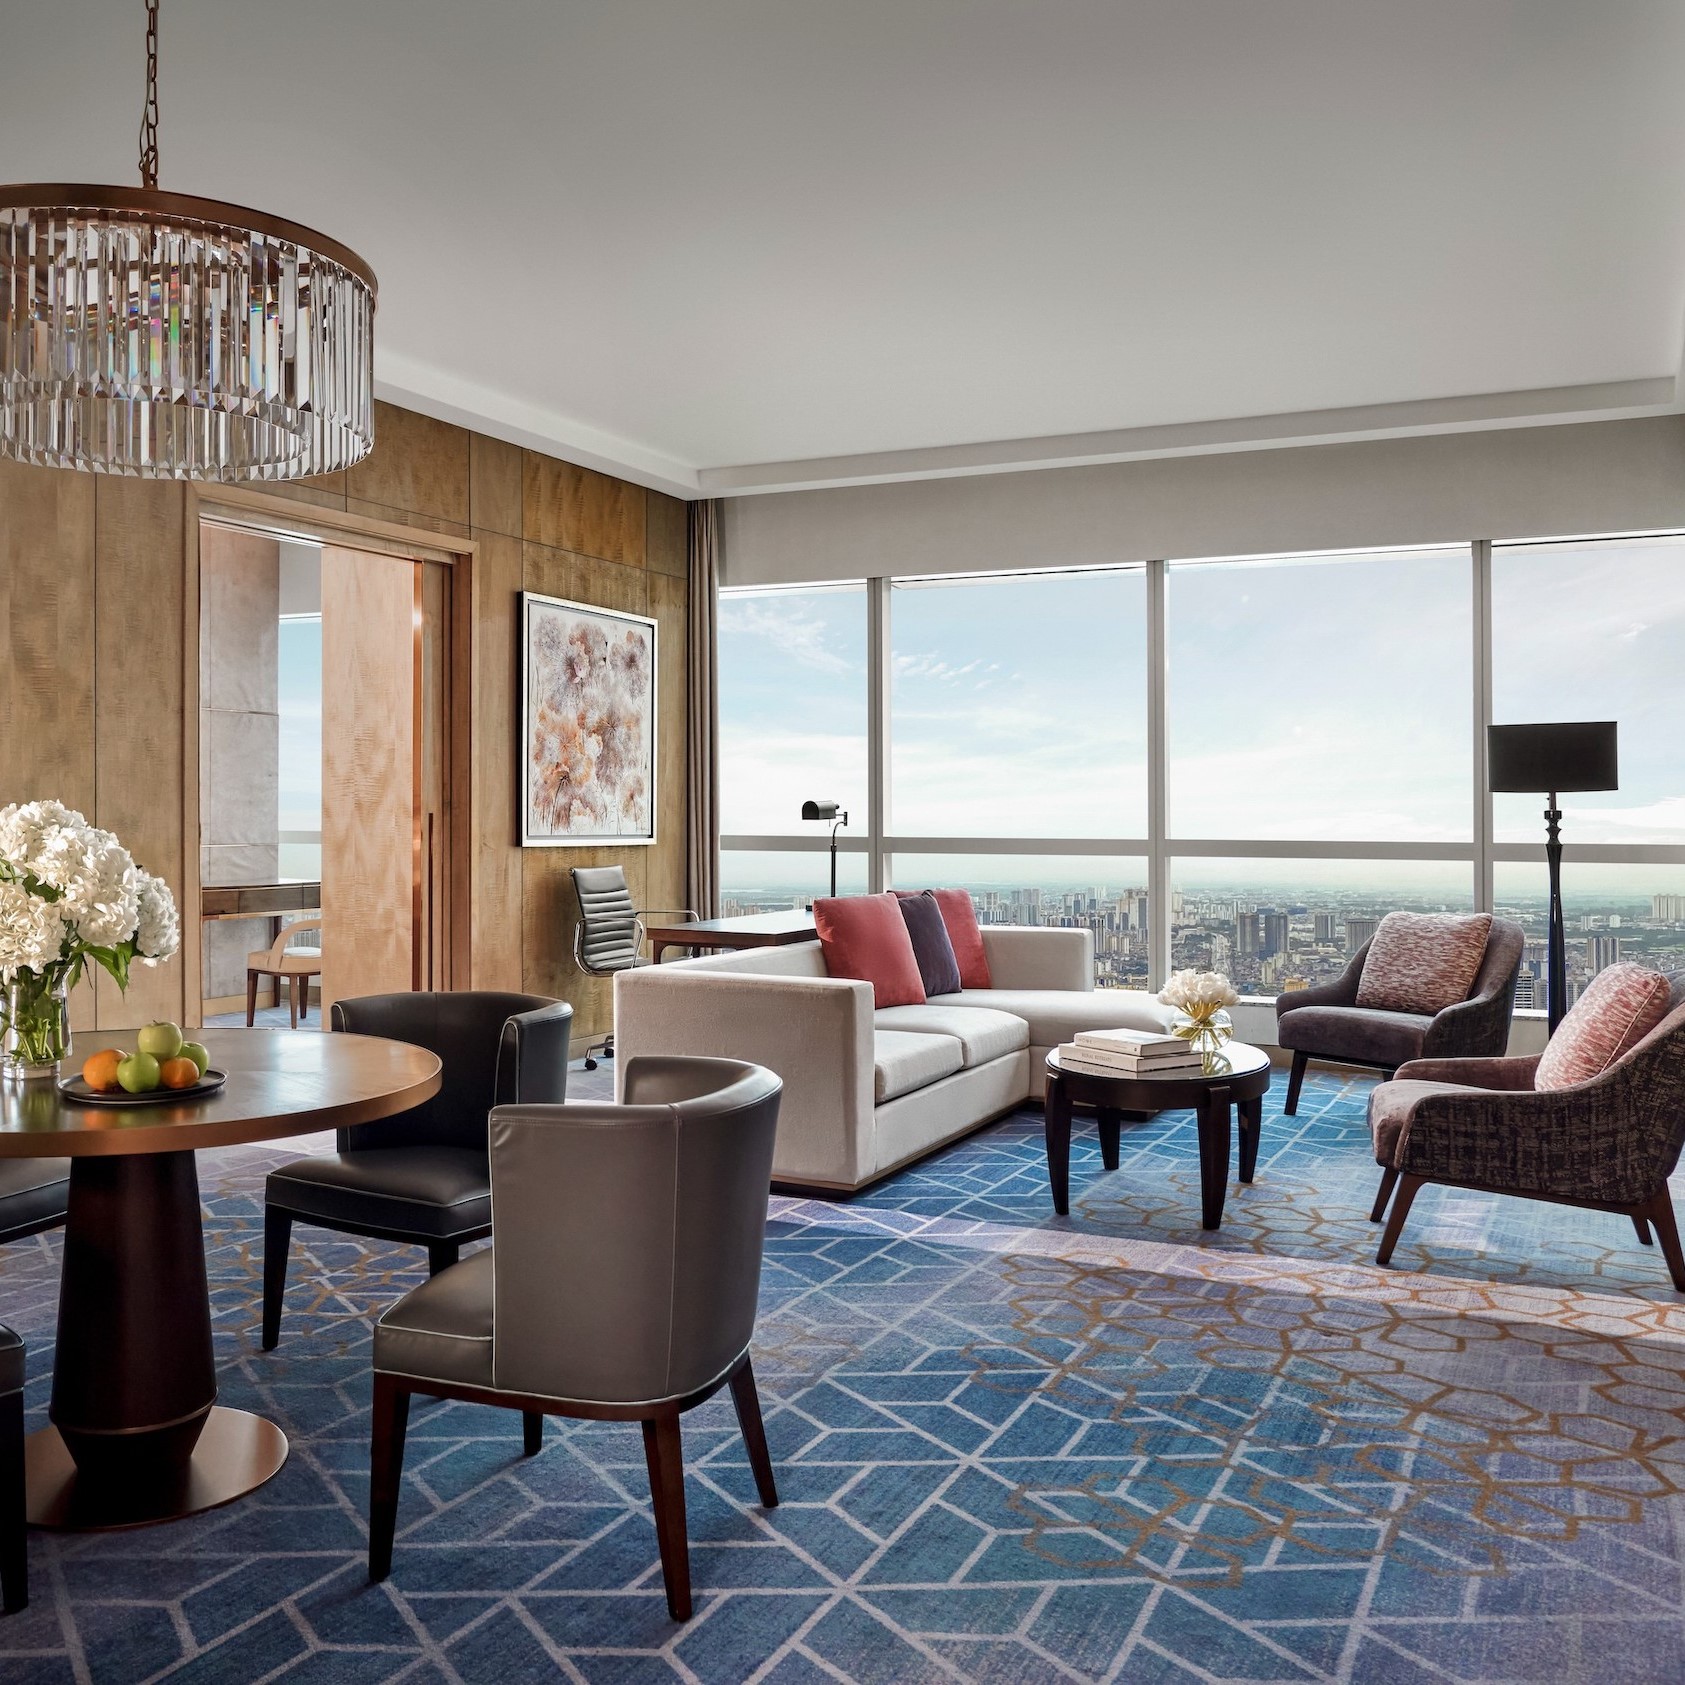 Luxurious accommodation and Club InterContinental benefits with Ambassador Suite at InterContinental Hanoi Landmark72